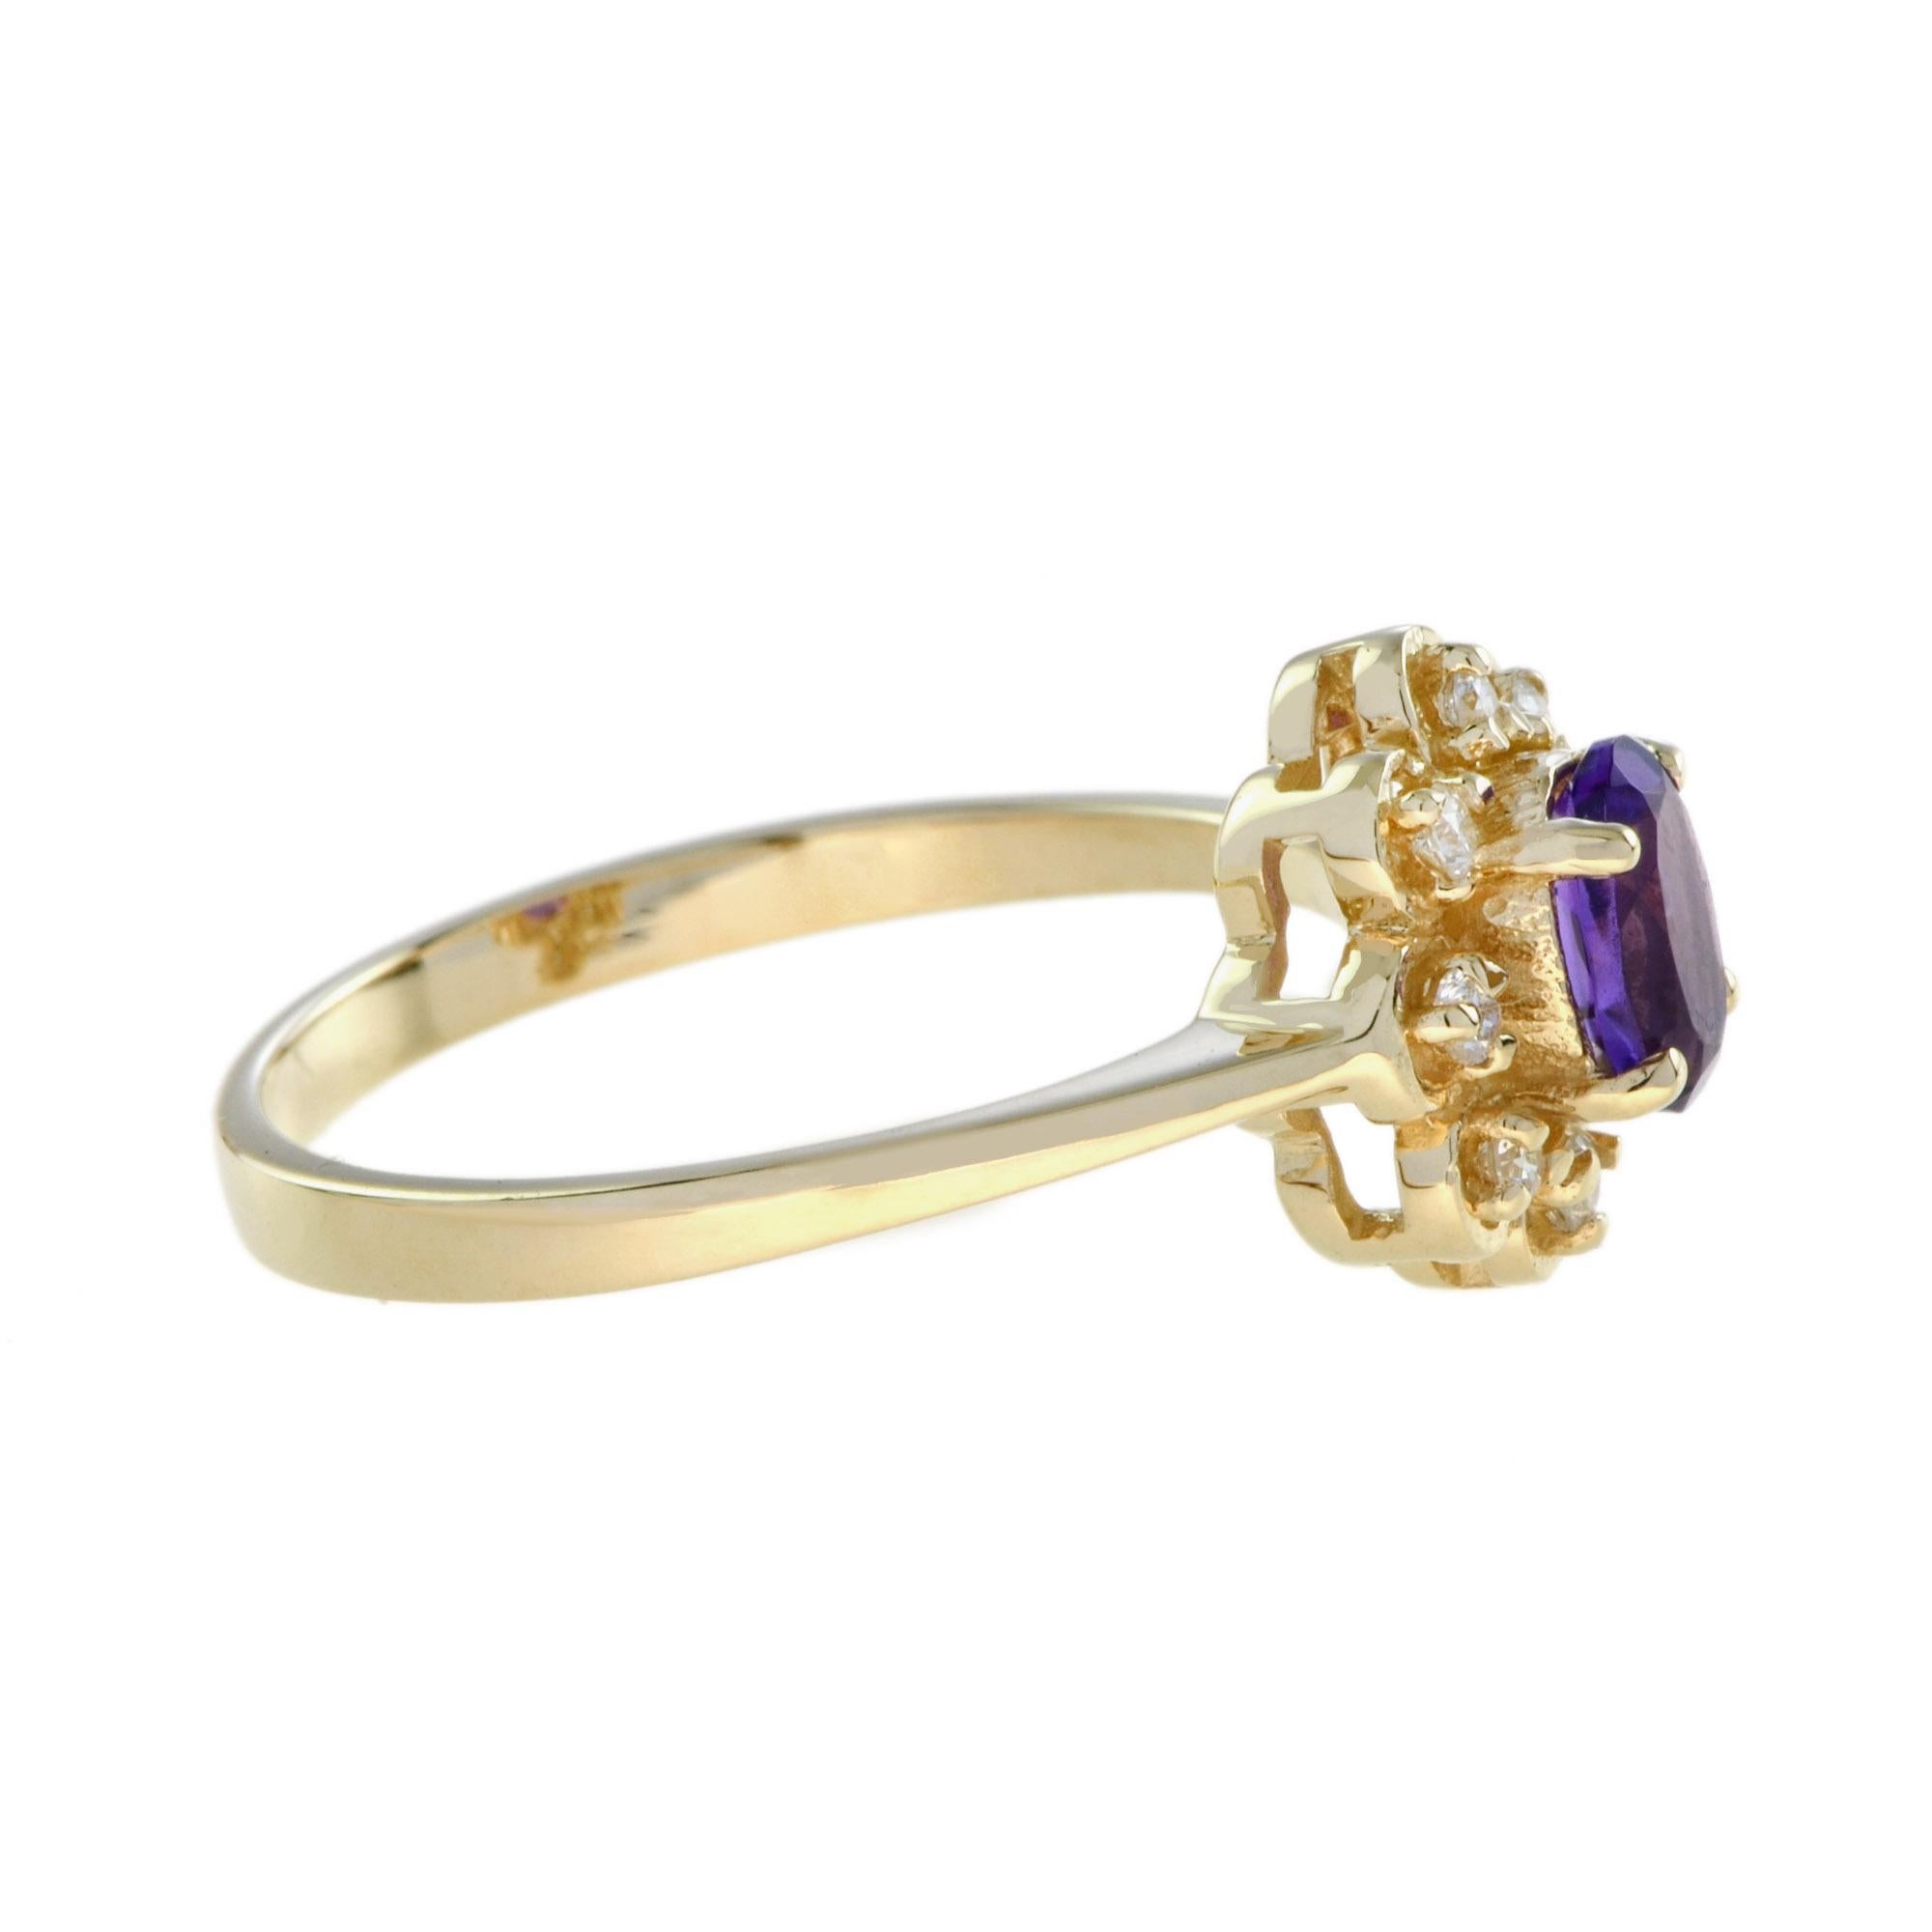 For Sale:  Vintage Style Amethyst and Diamond Halo Ring in 14K Yellow Gold 3